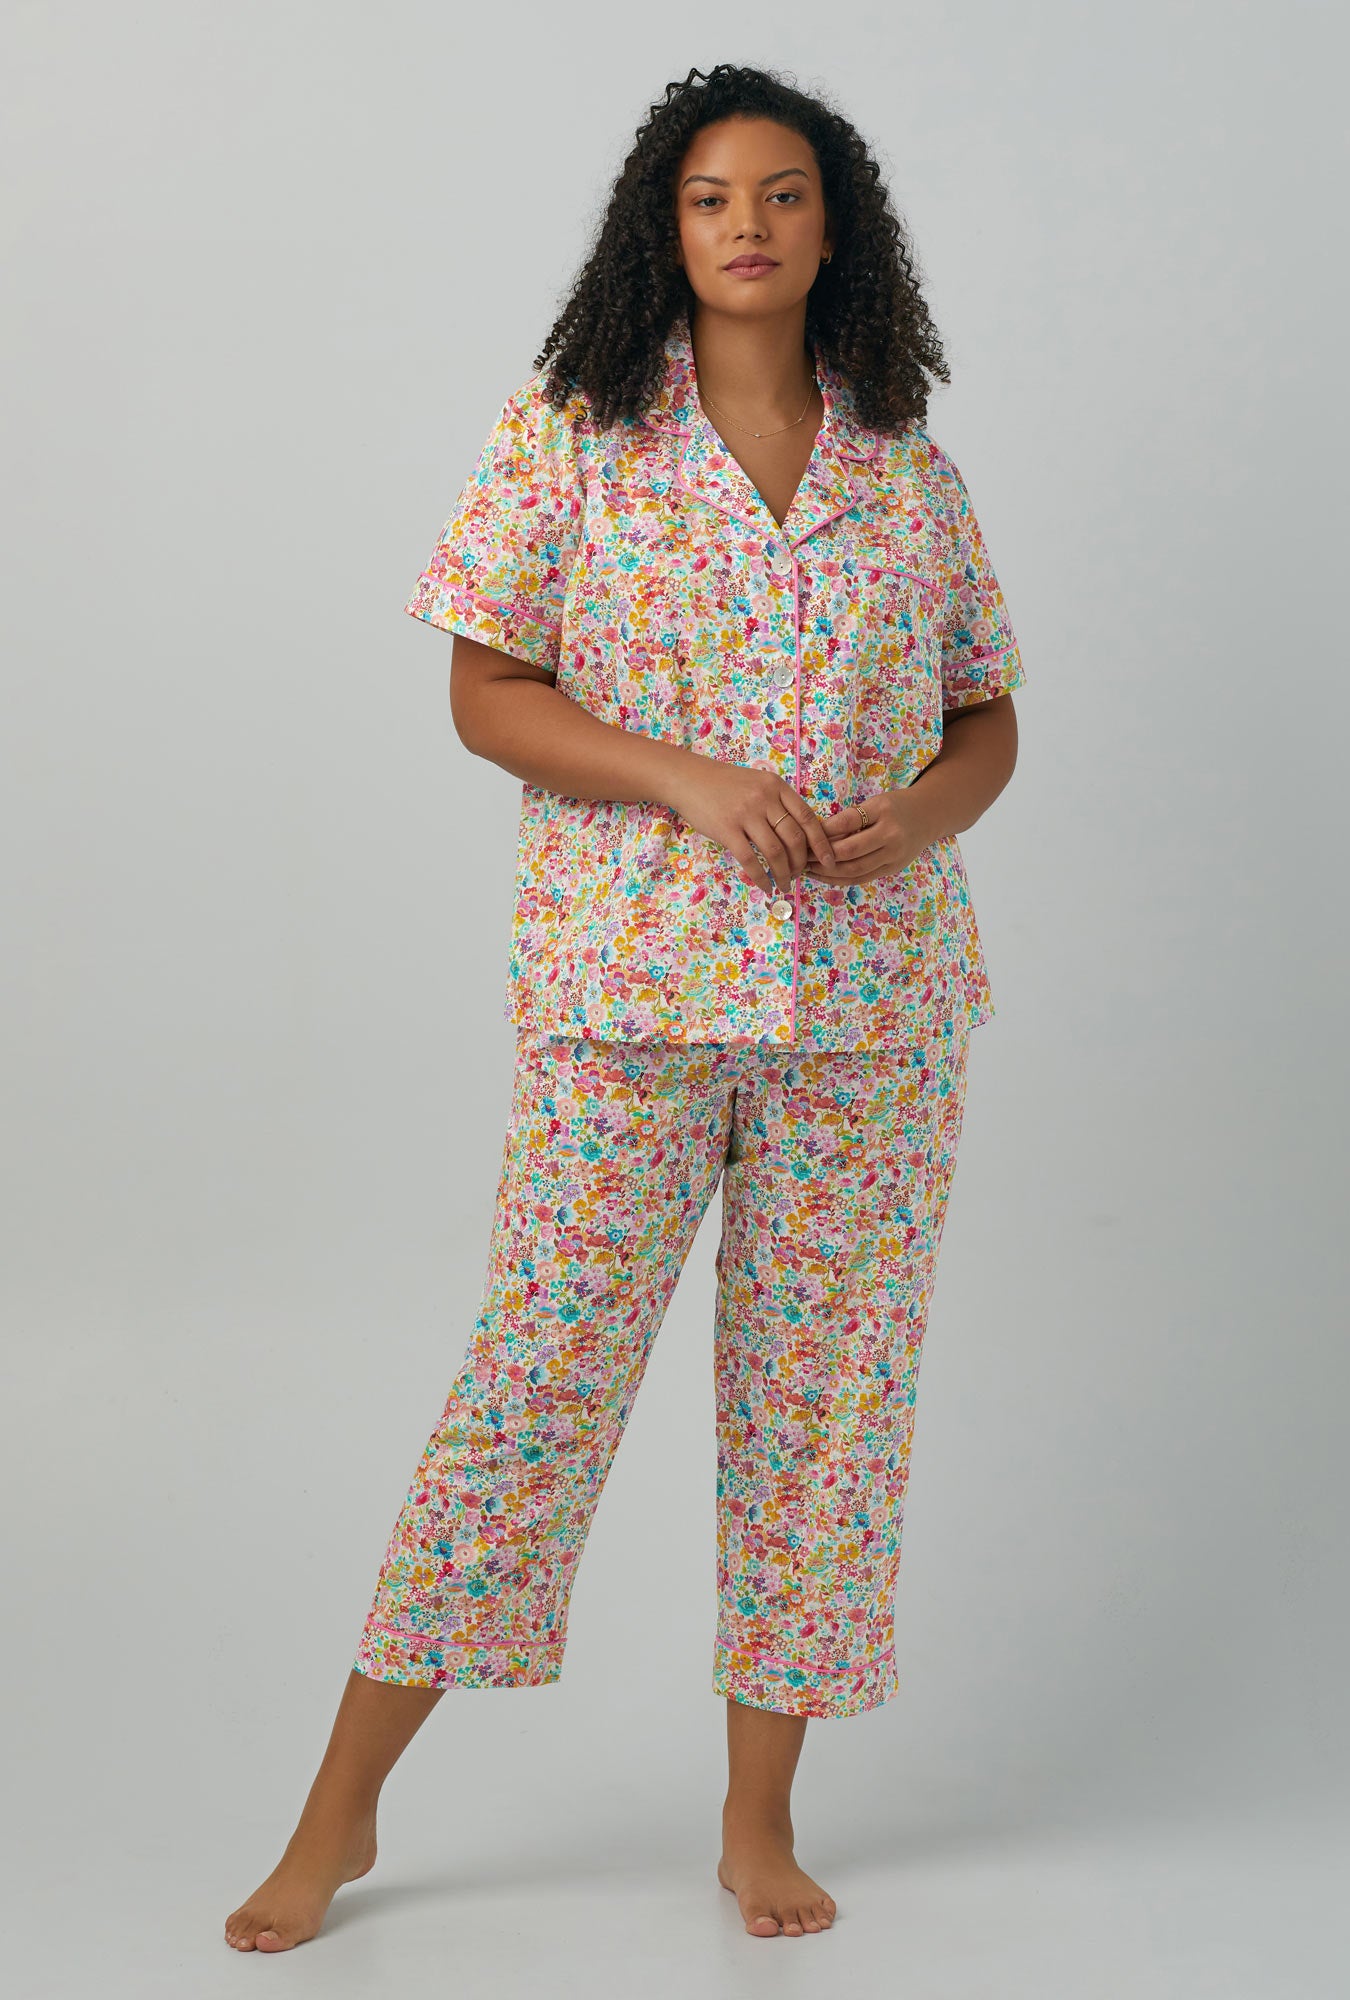 A lady wearing  multi color short Sleeve Classic Woven Cotton PJ Set with Classic Meadow print